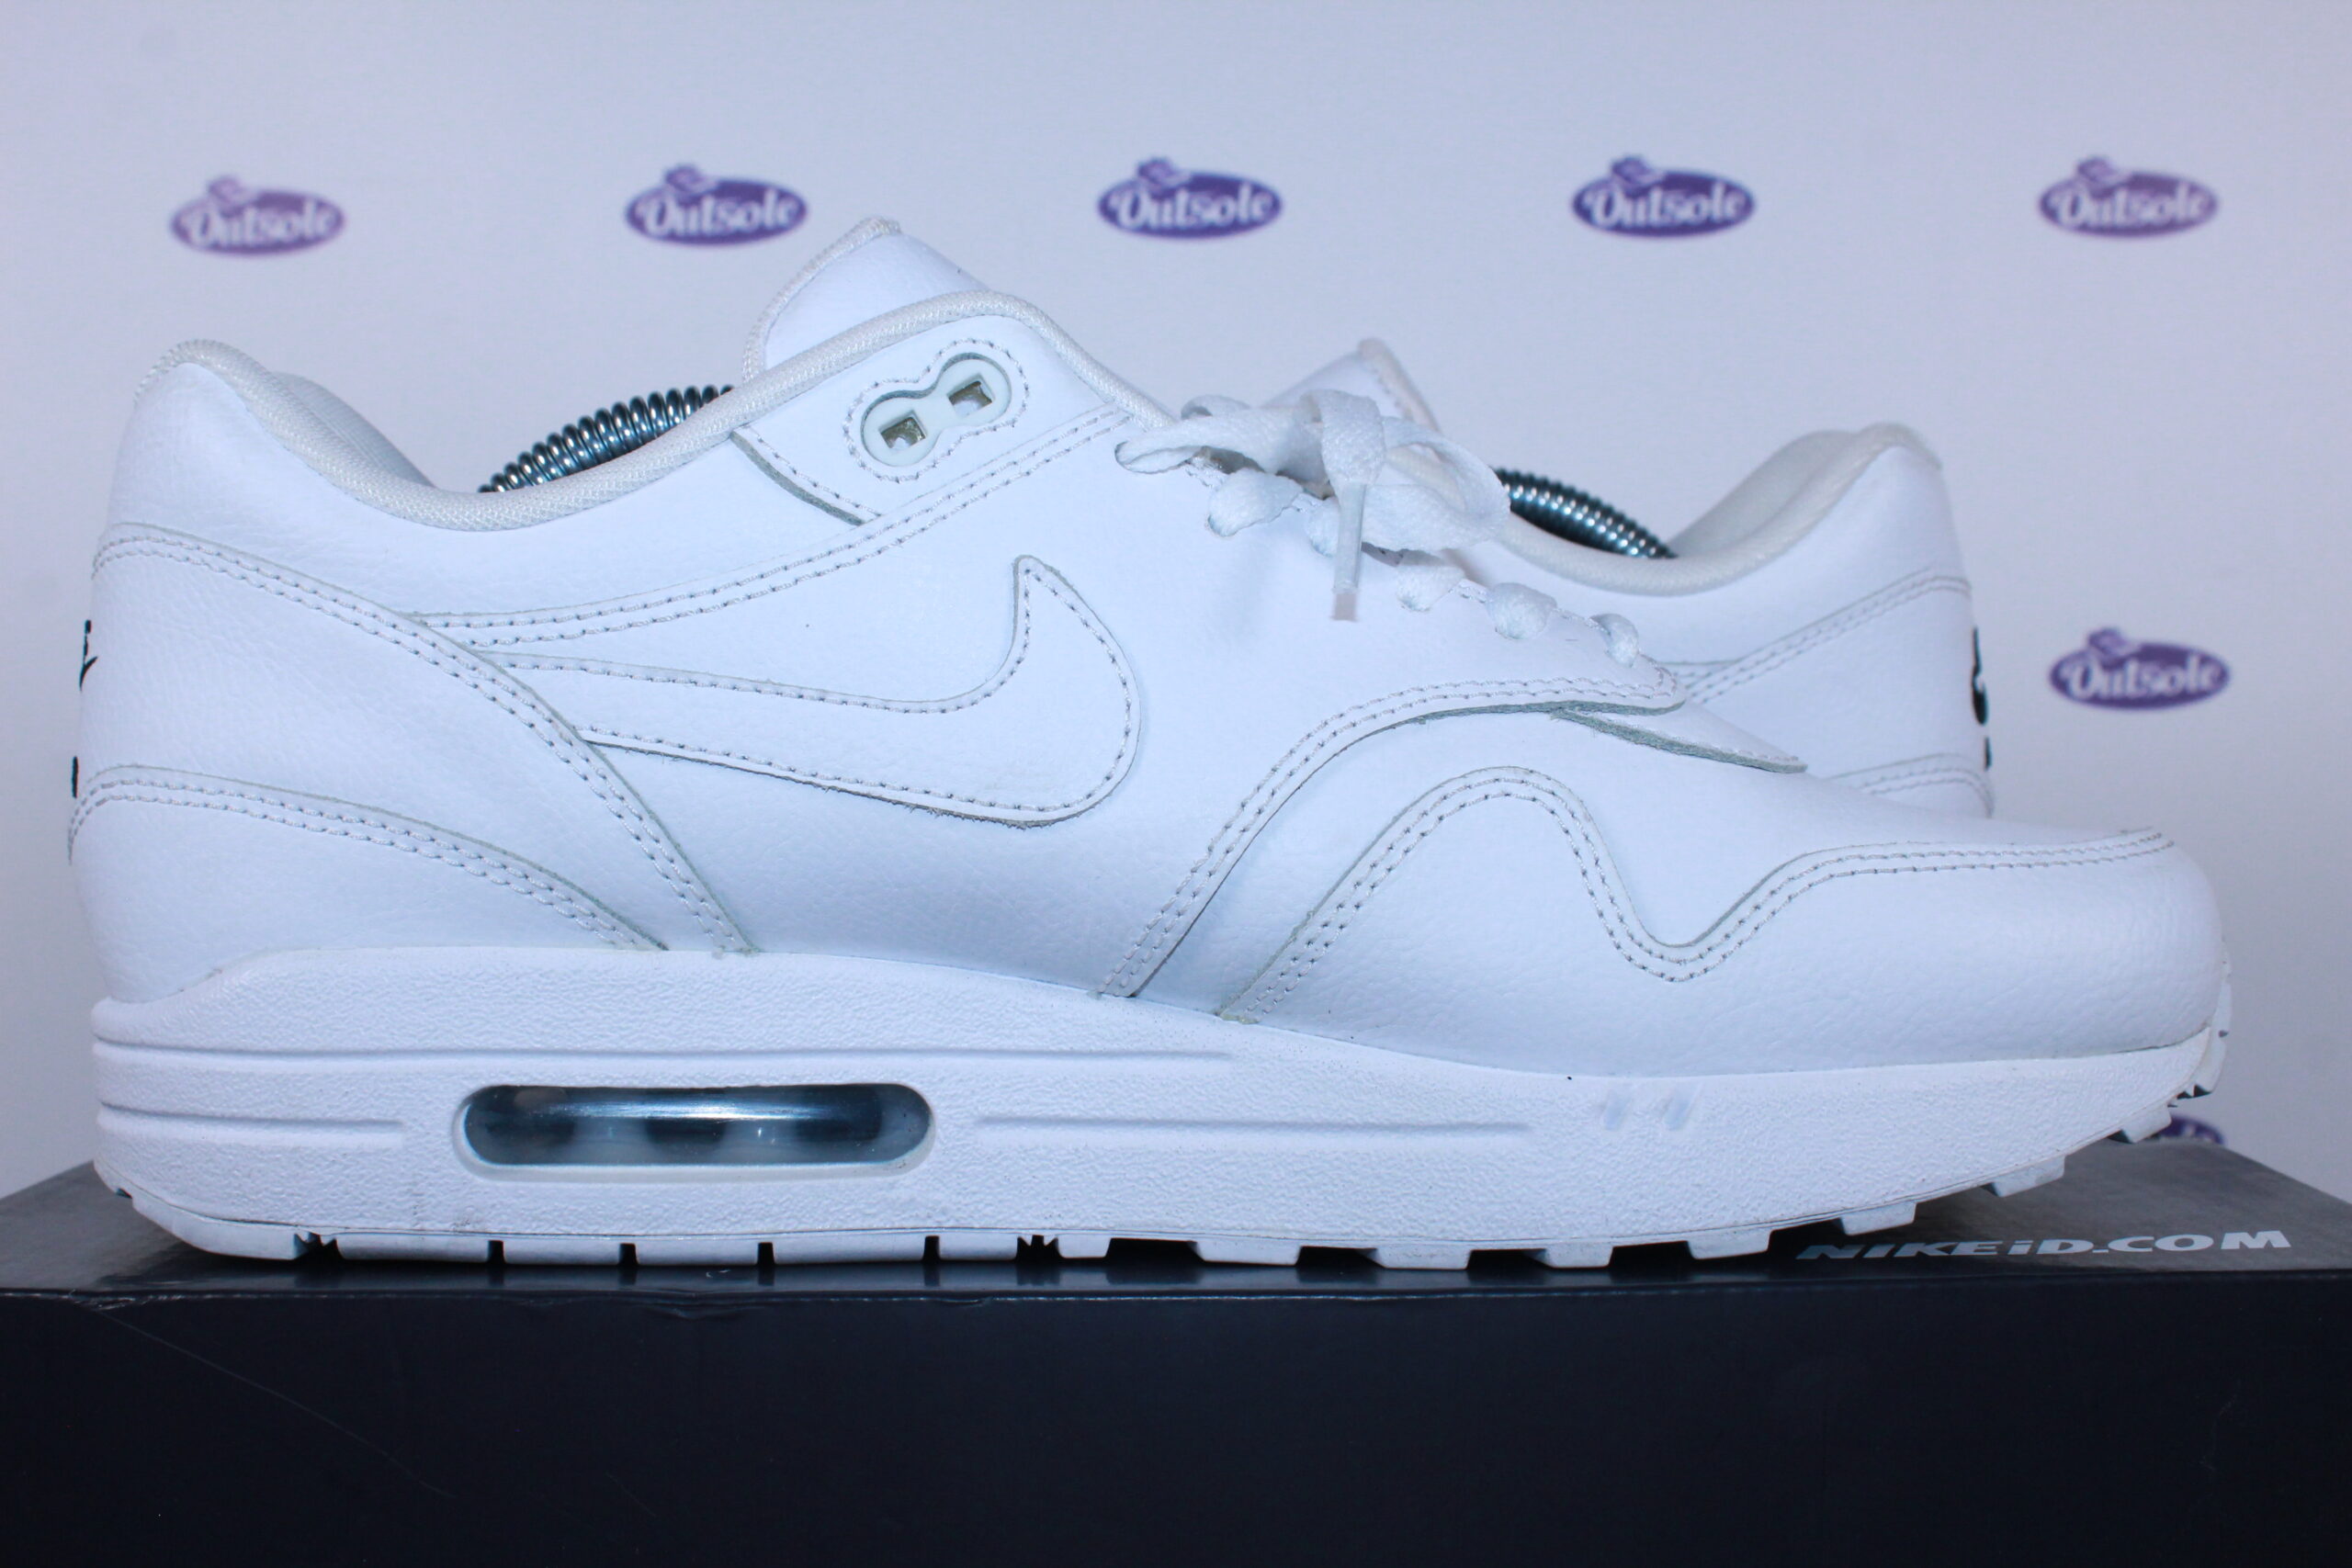 beloning succes offset Nike Air Max 1 ID White Leather No Nike • ✓ Op voorraad bij Outsole